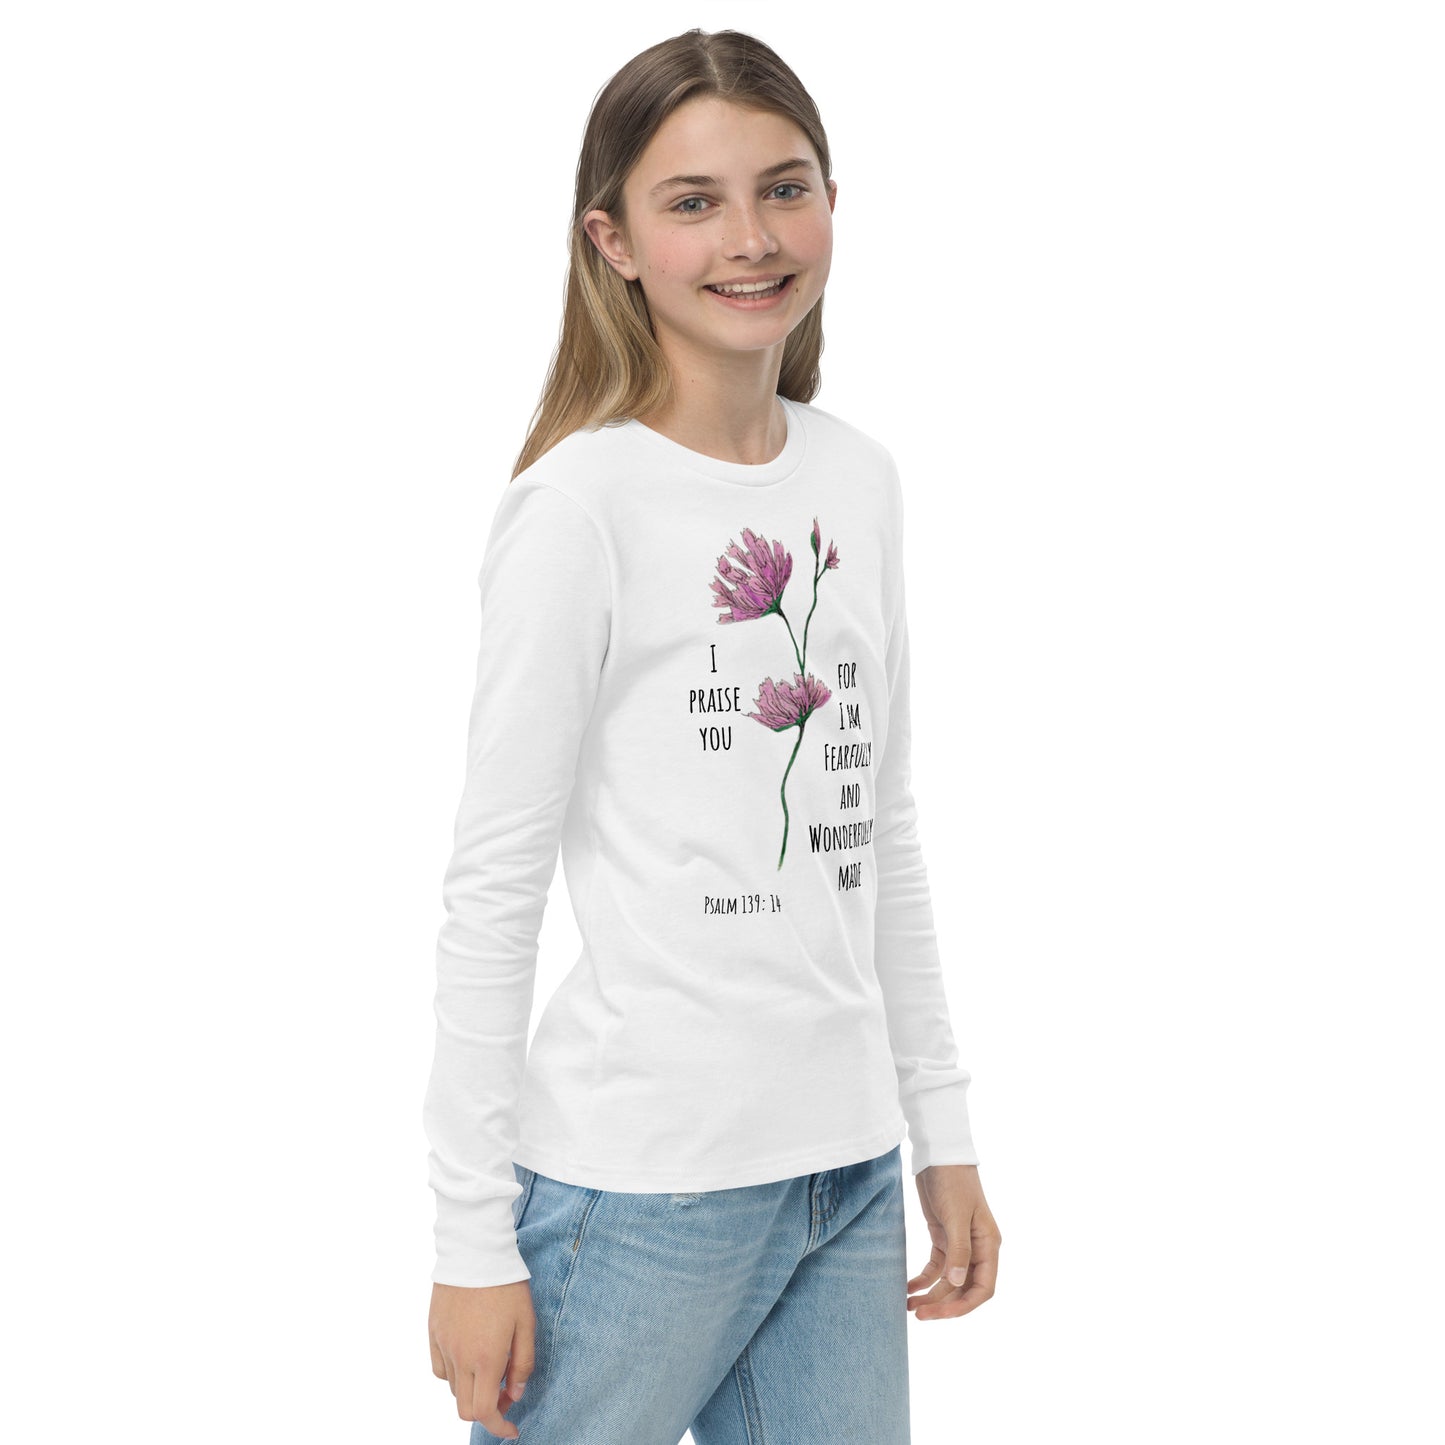 Fearfully and Wonderfully made- Youth long sleeve tee